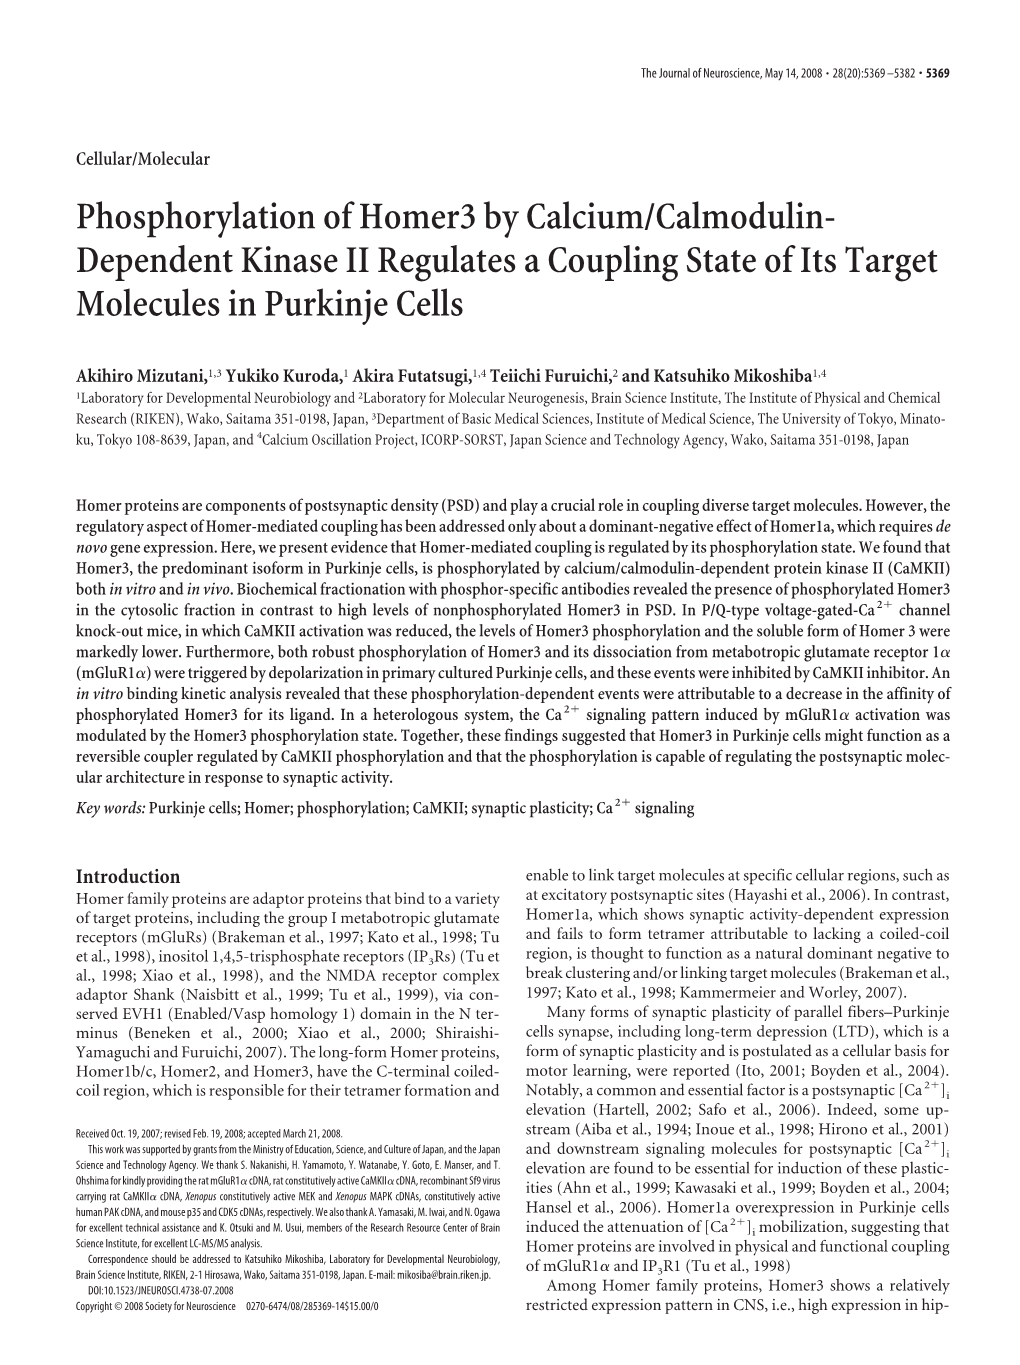 Phosphorylation of Homer3 by Calcium/Calmodulin- Dependent Kinase II Regulates a Coupling State of Its Target Molecules in Purkinje Cells